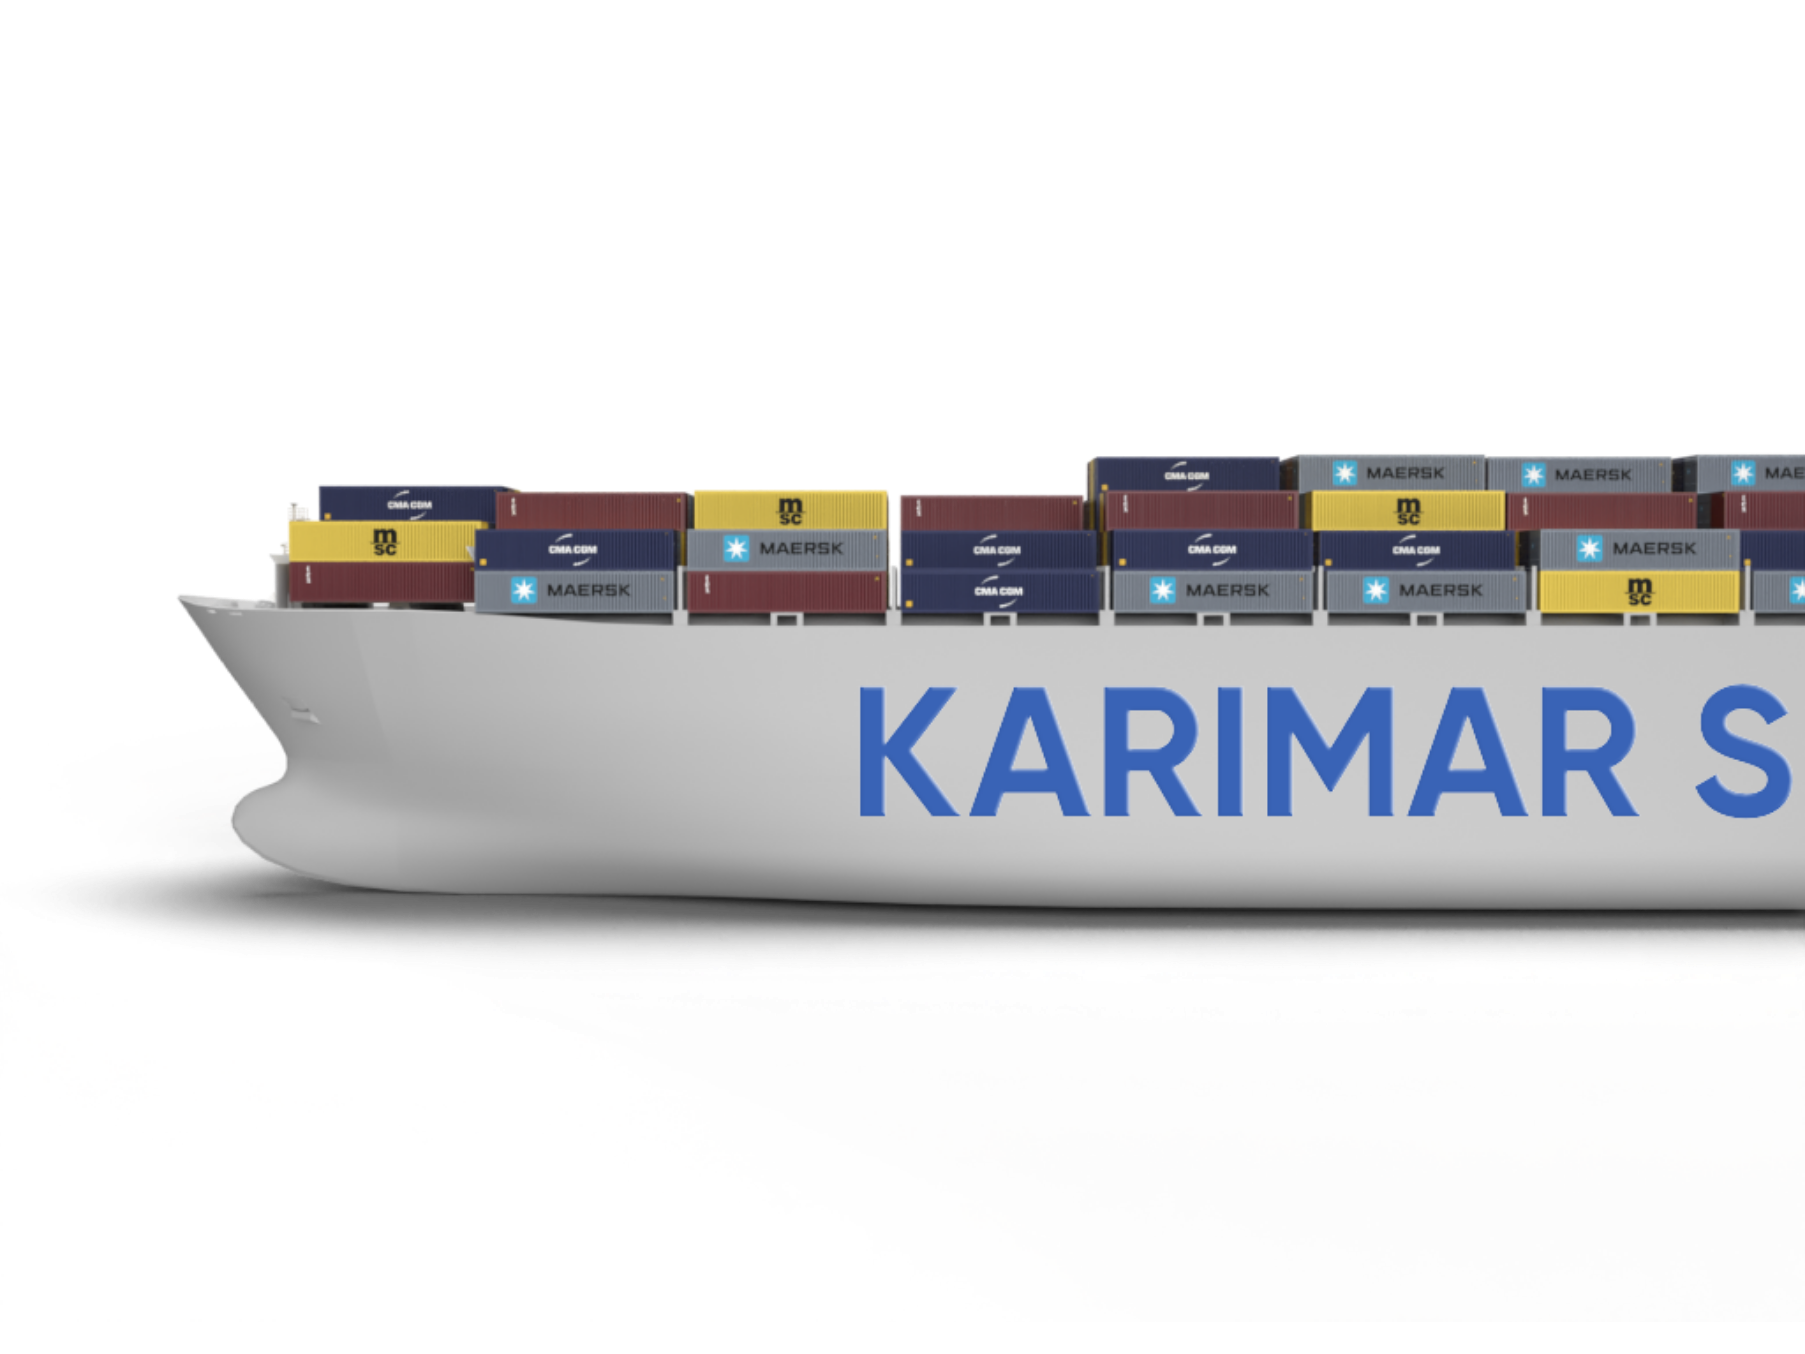 a ship carrying karimar logo and has containers onboarded